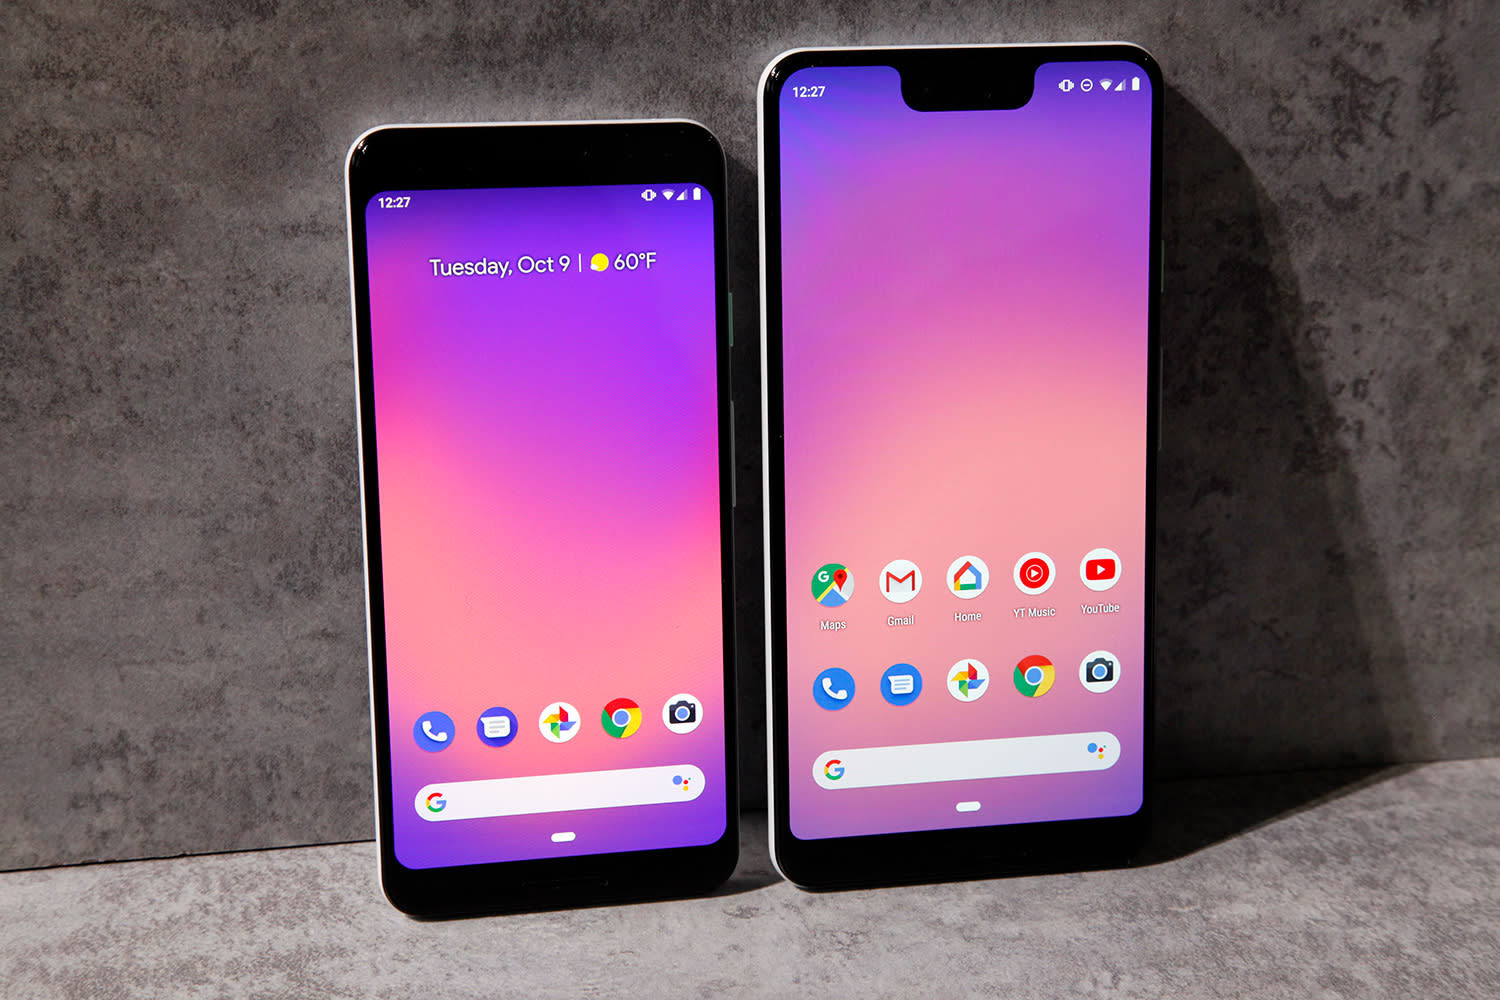 Pixel 3 preorders to start on October 9th, right after Google’s press event – BGR